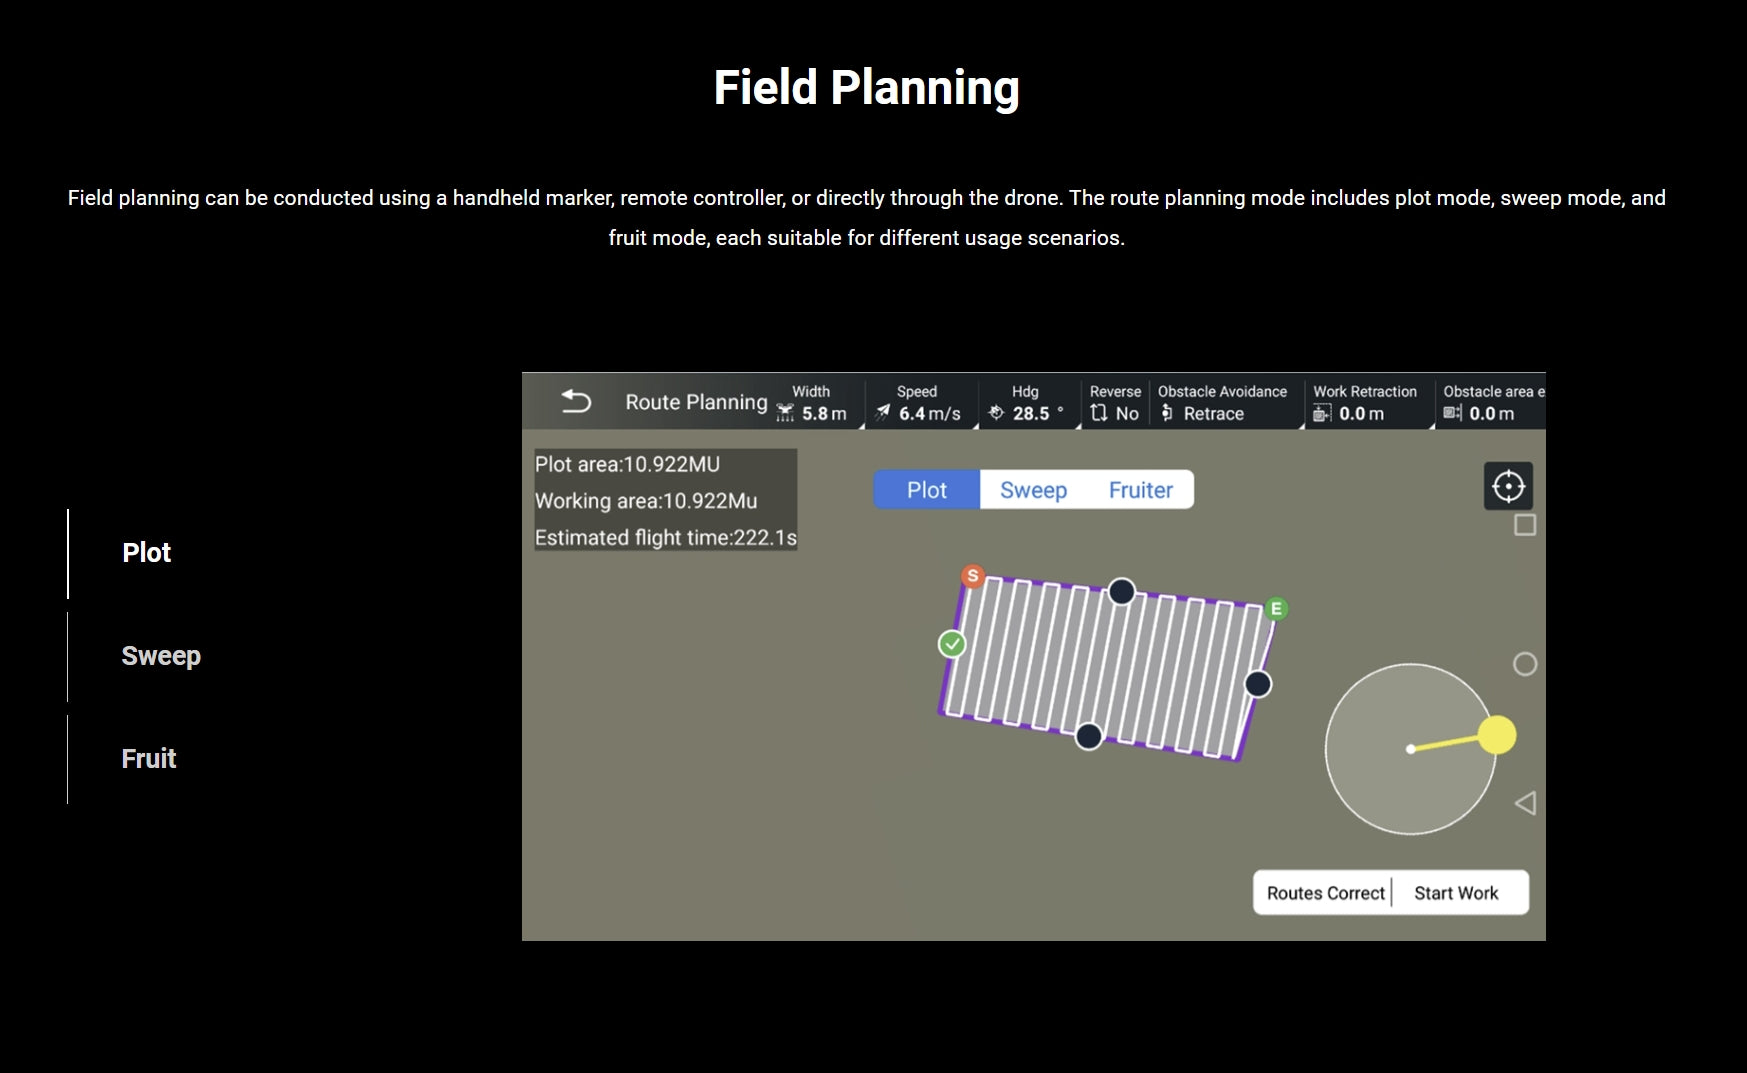 H60-4 Agricultural Drone, route planning mode includes plot mode, sweep mode, and fruit mode . route planning can be